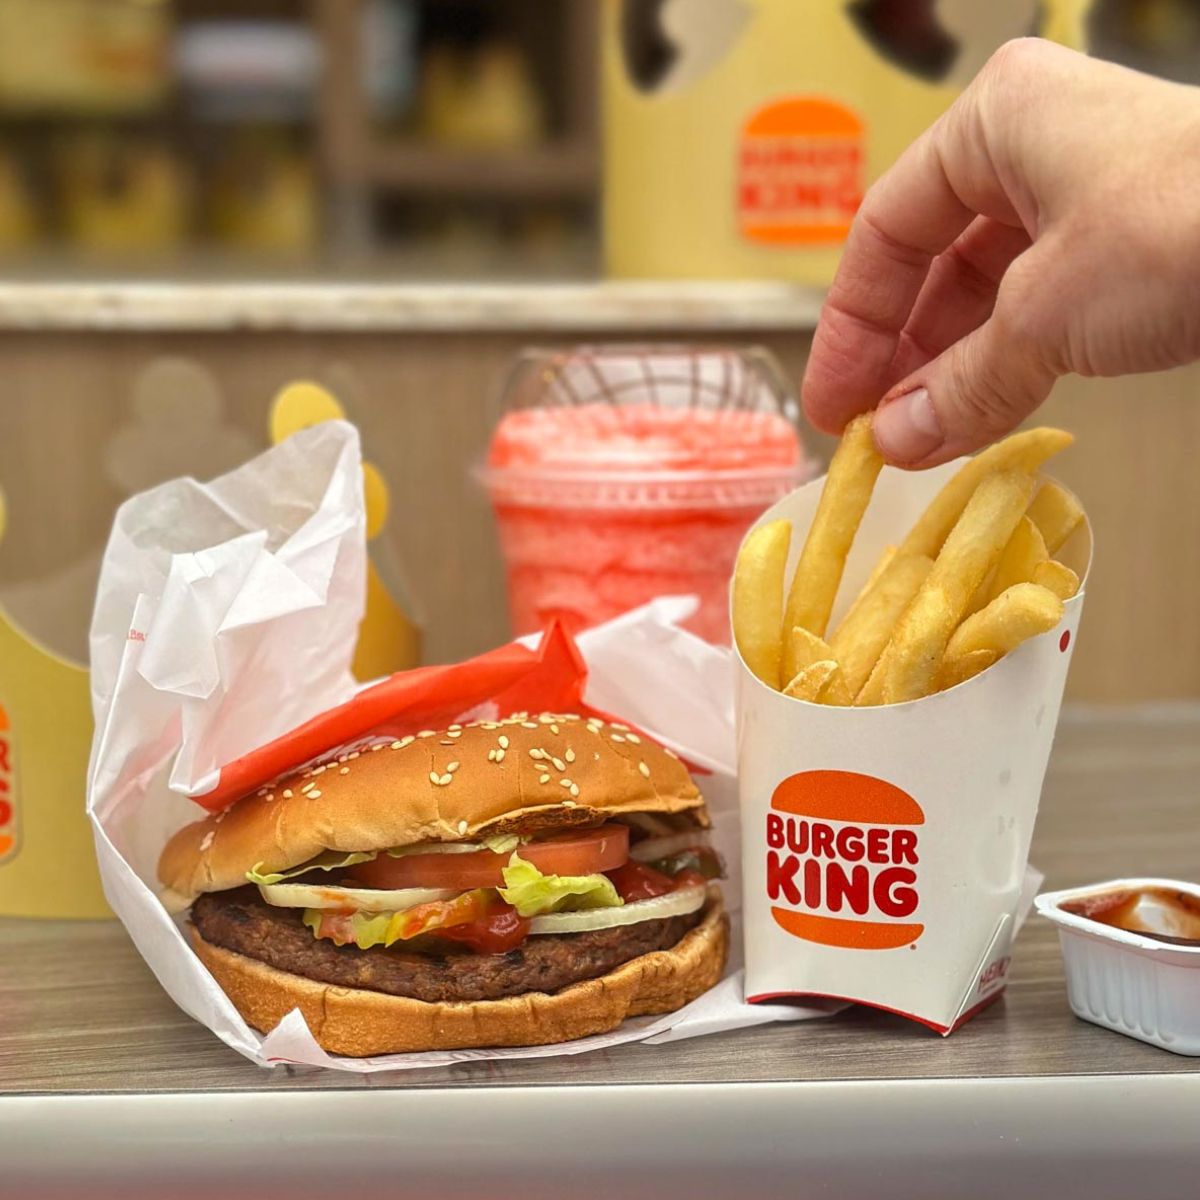 A collection of vegan items at Burger King including the Impossible Whopper, fries, and slushie.